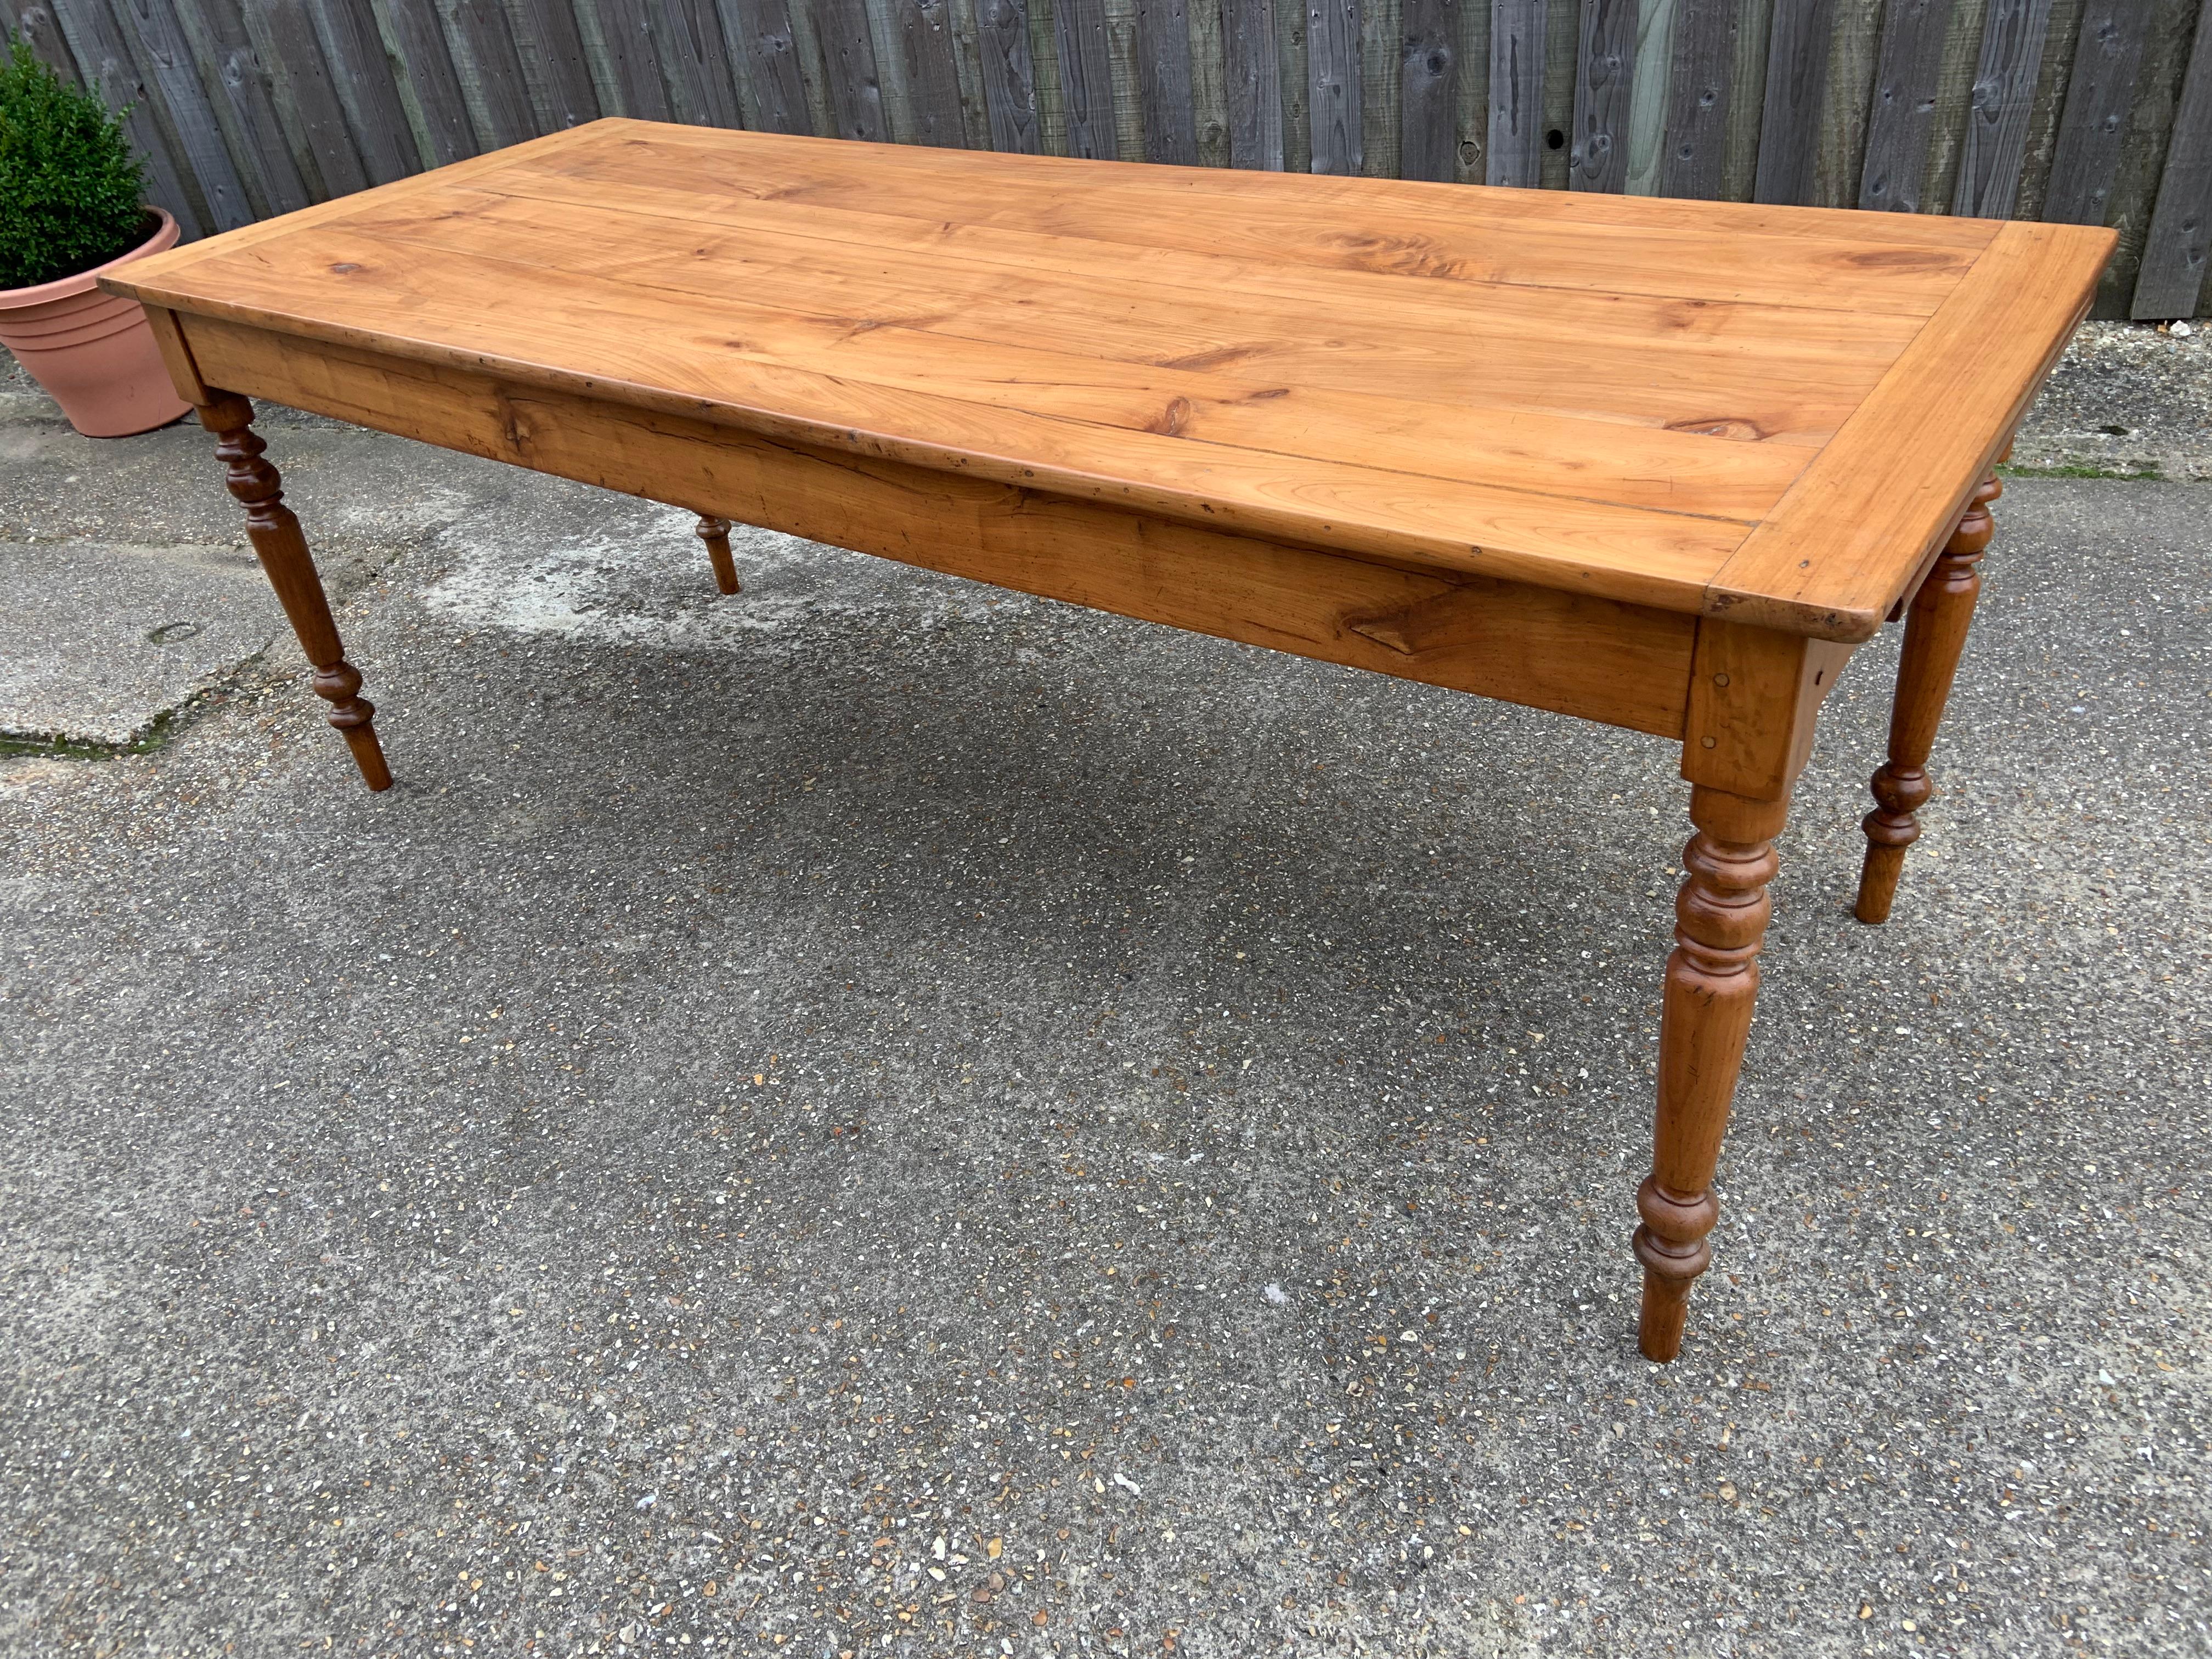 French Provincial Late 19th Century Pale Cherry Farmhouse Table with Slide